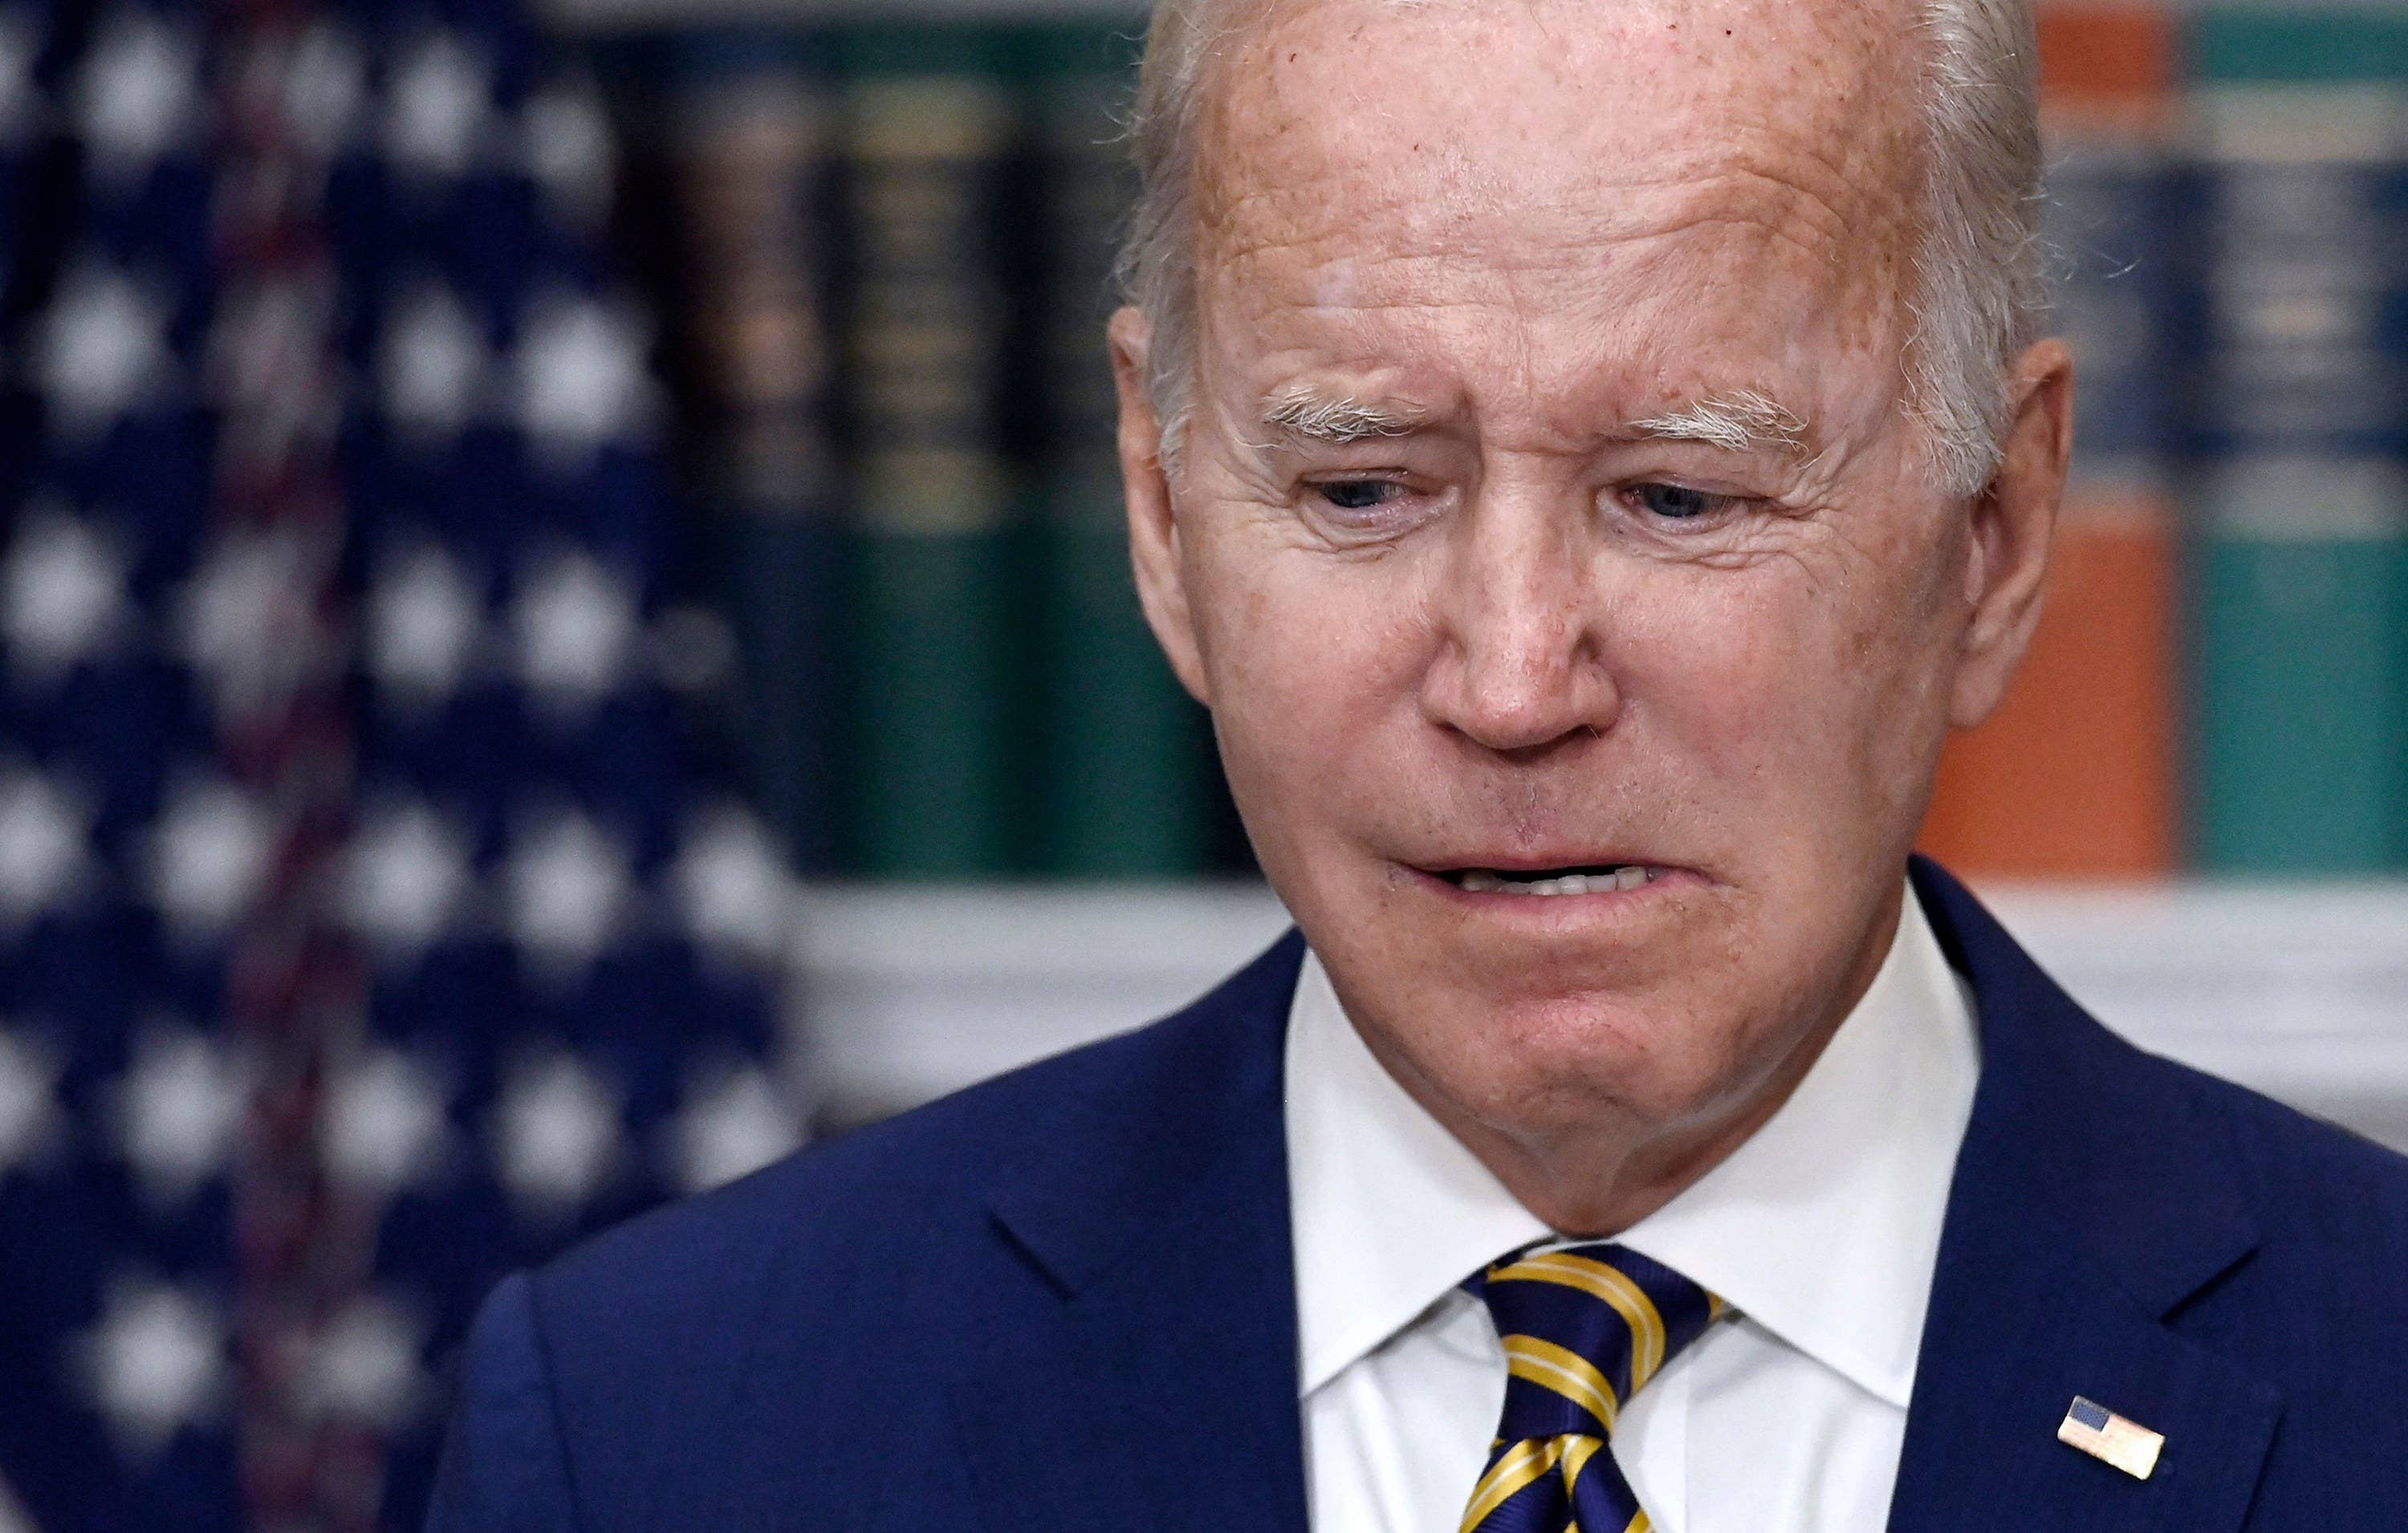 What To Know Now That Biden’s Student Loan Forgiveness Has Been Ruled Unconstitutional